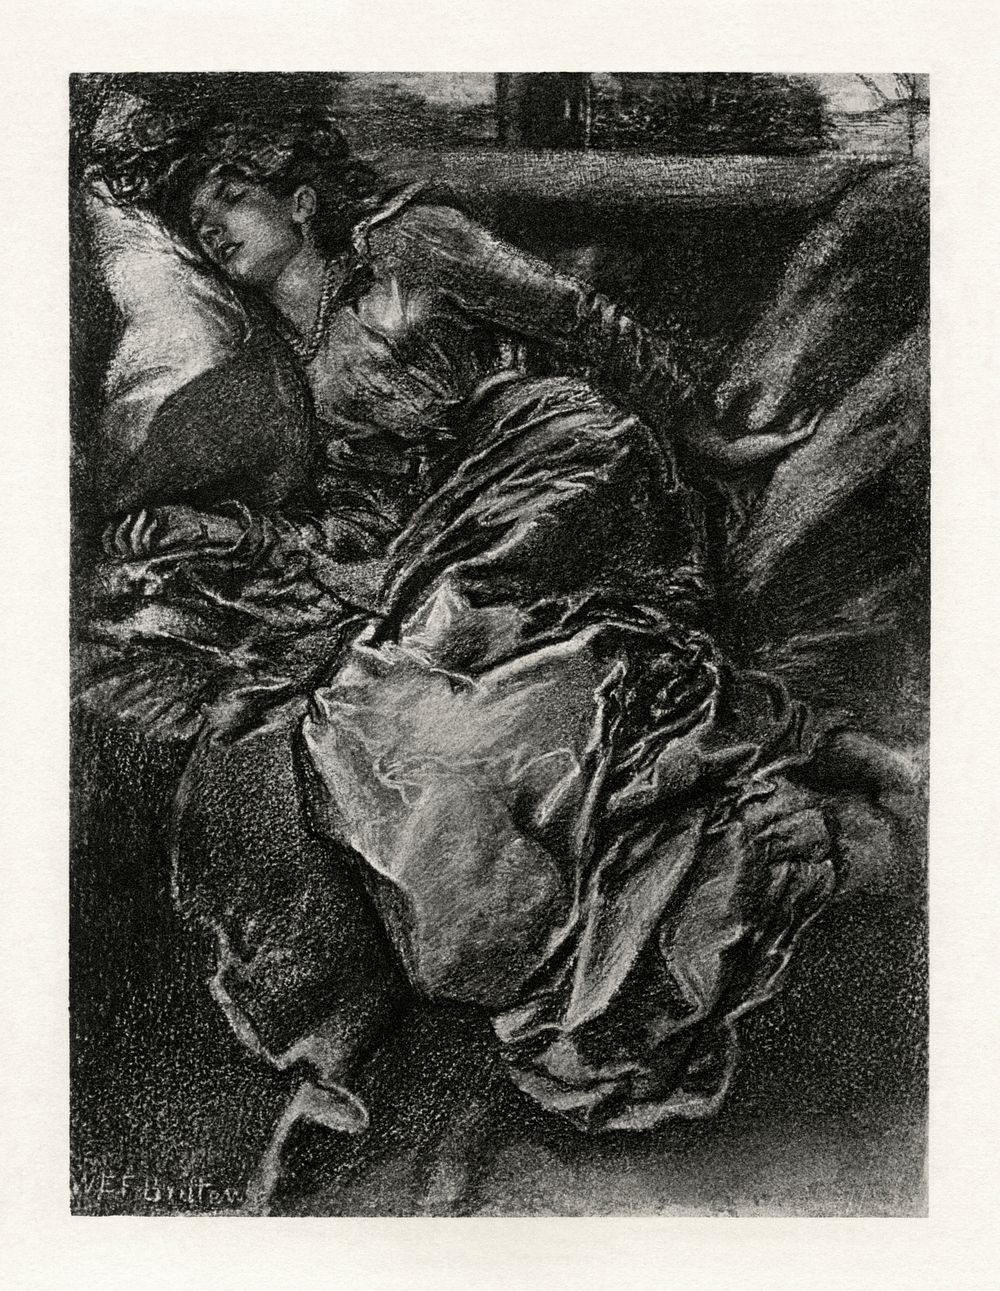 Illustration to Tennyson's "Sleeping Beauty" by W. E. F. Britten. Like a lot of Tennyson poems based on a literary source…